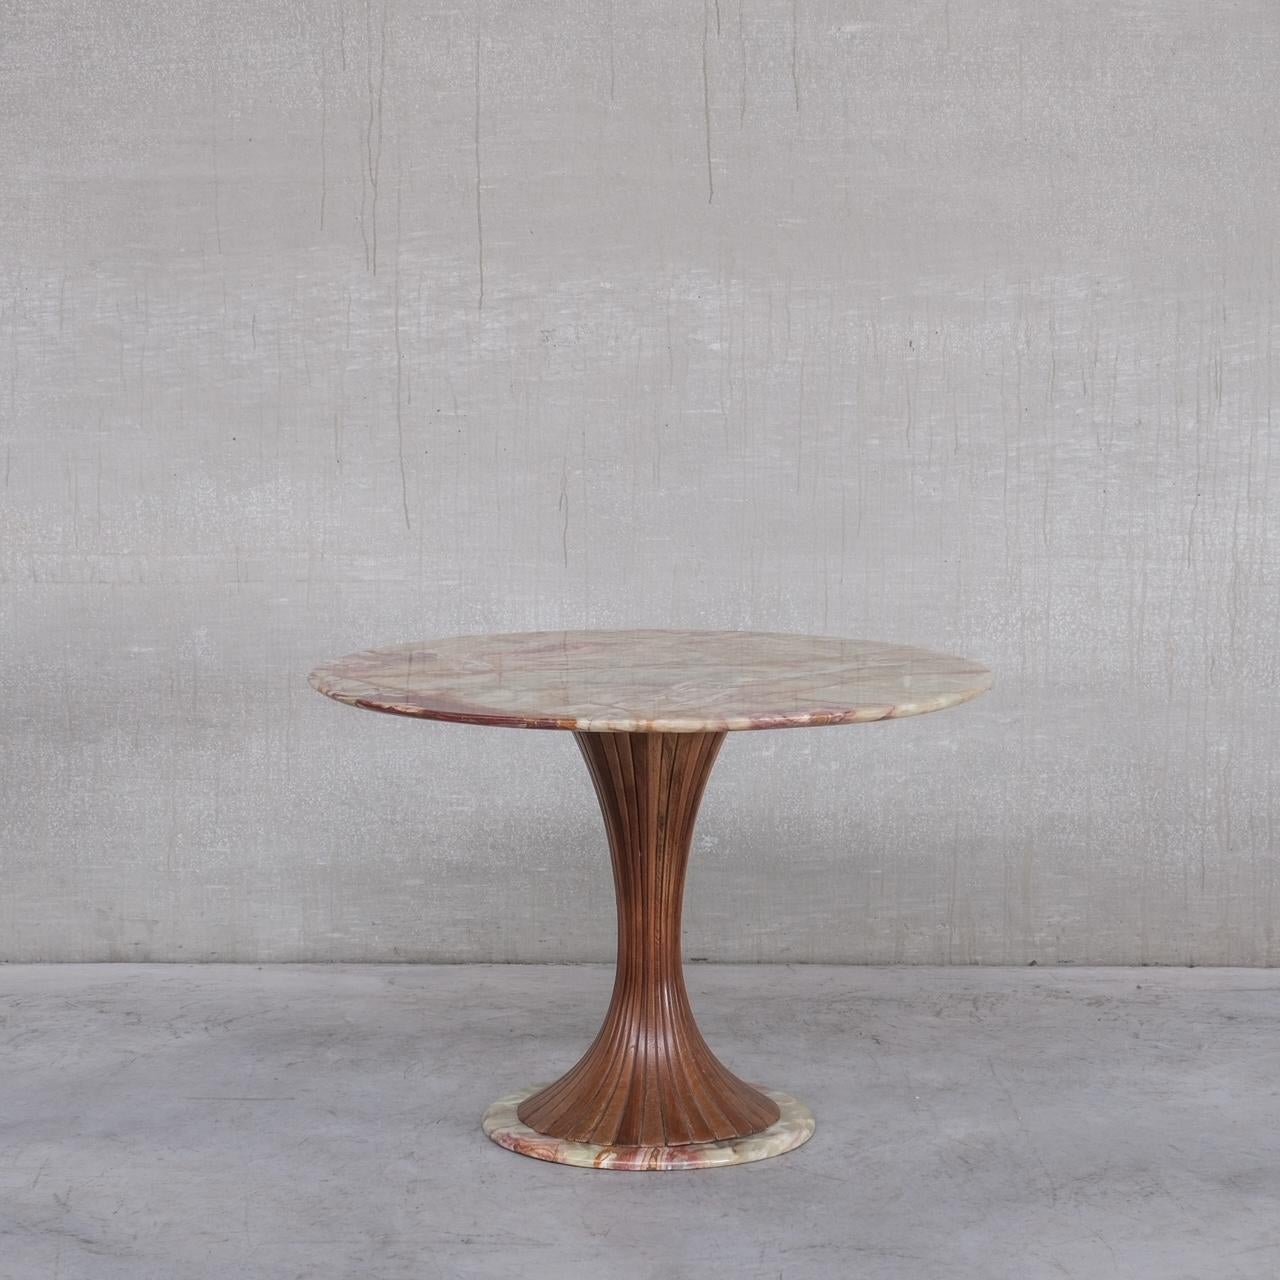 An Onyx and Wood, Italian dining or centre table. 

Italy, c1940s. 

Attributed to Vittorio Dassin. 

Solid onyx top and base, with a an elegant mahogany central pedestal. 

Remains in good condition, some scuffs and occasional scratch to